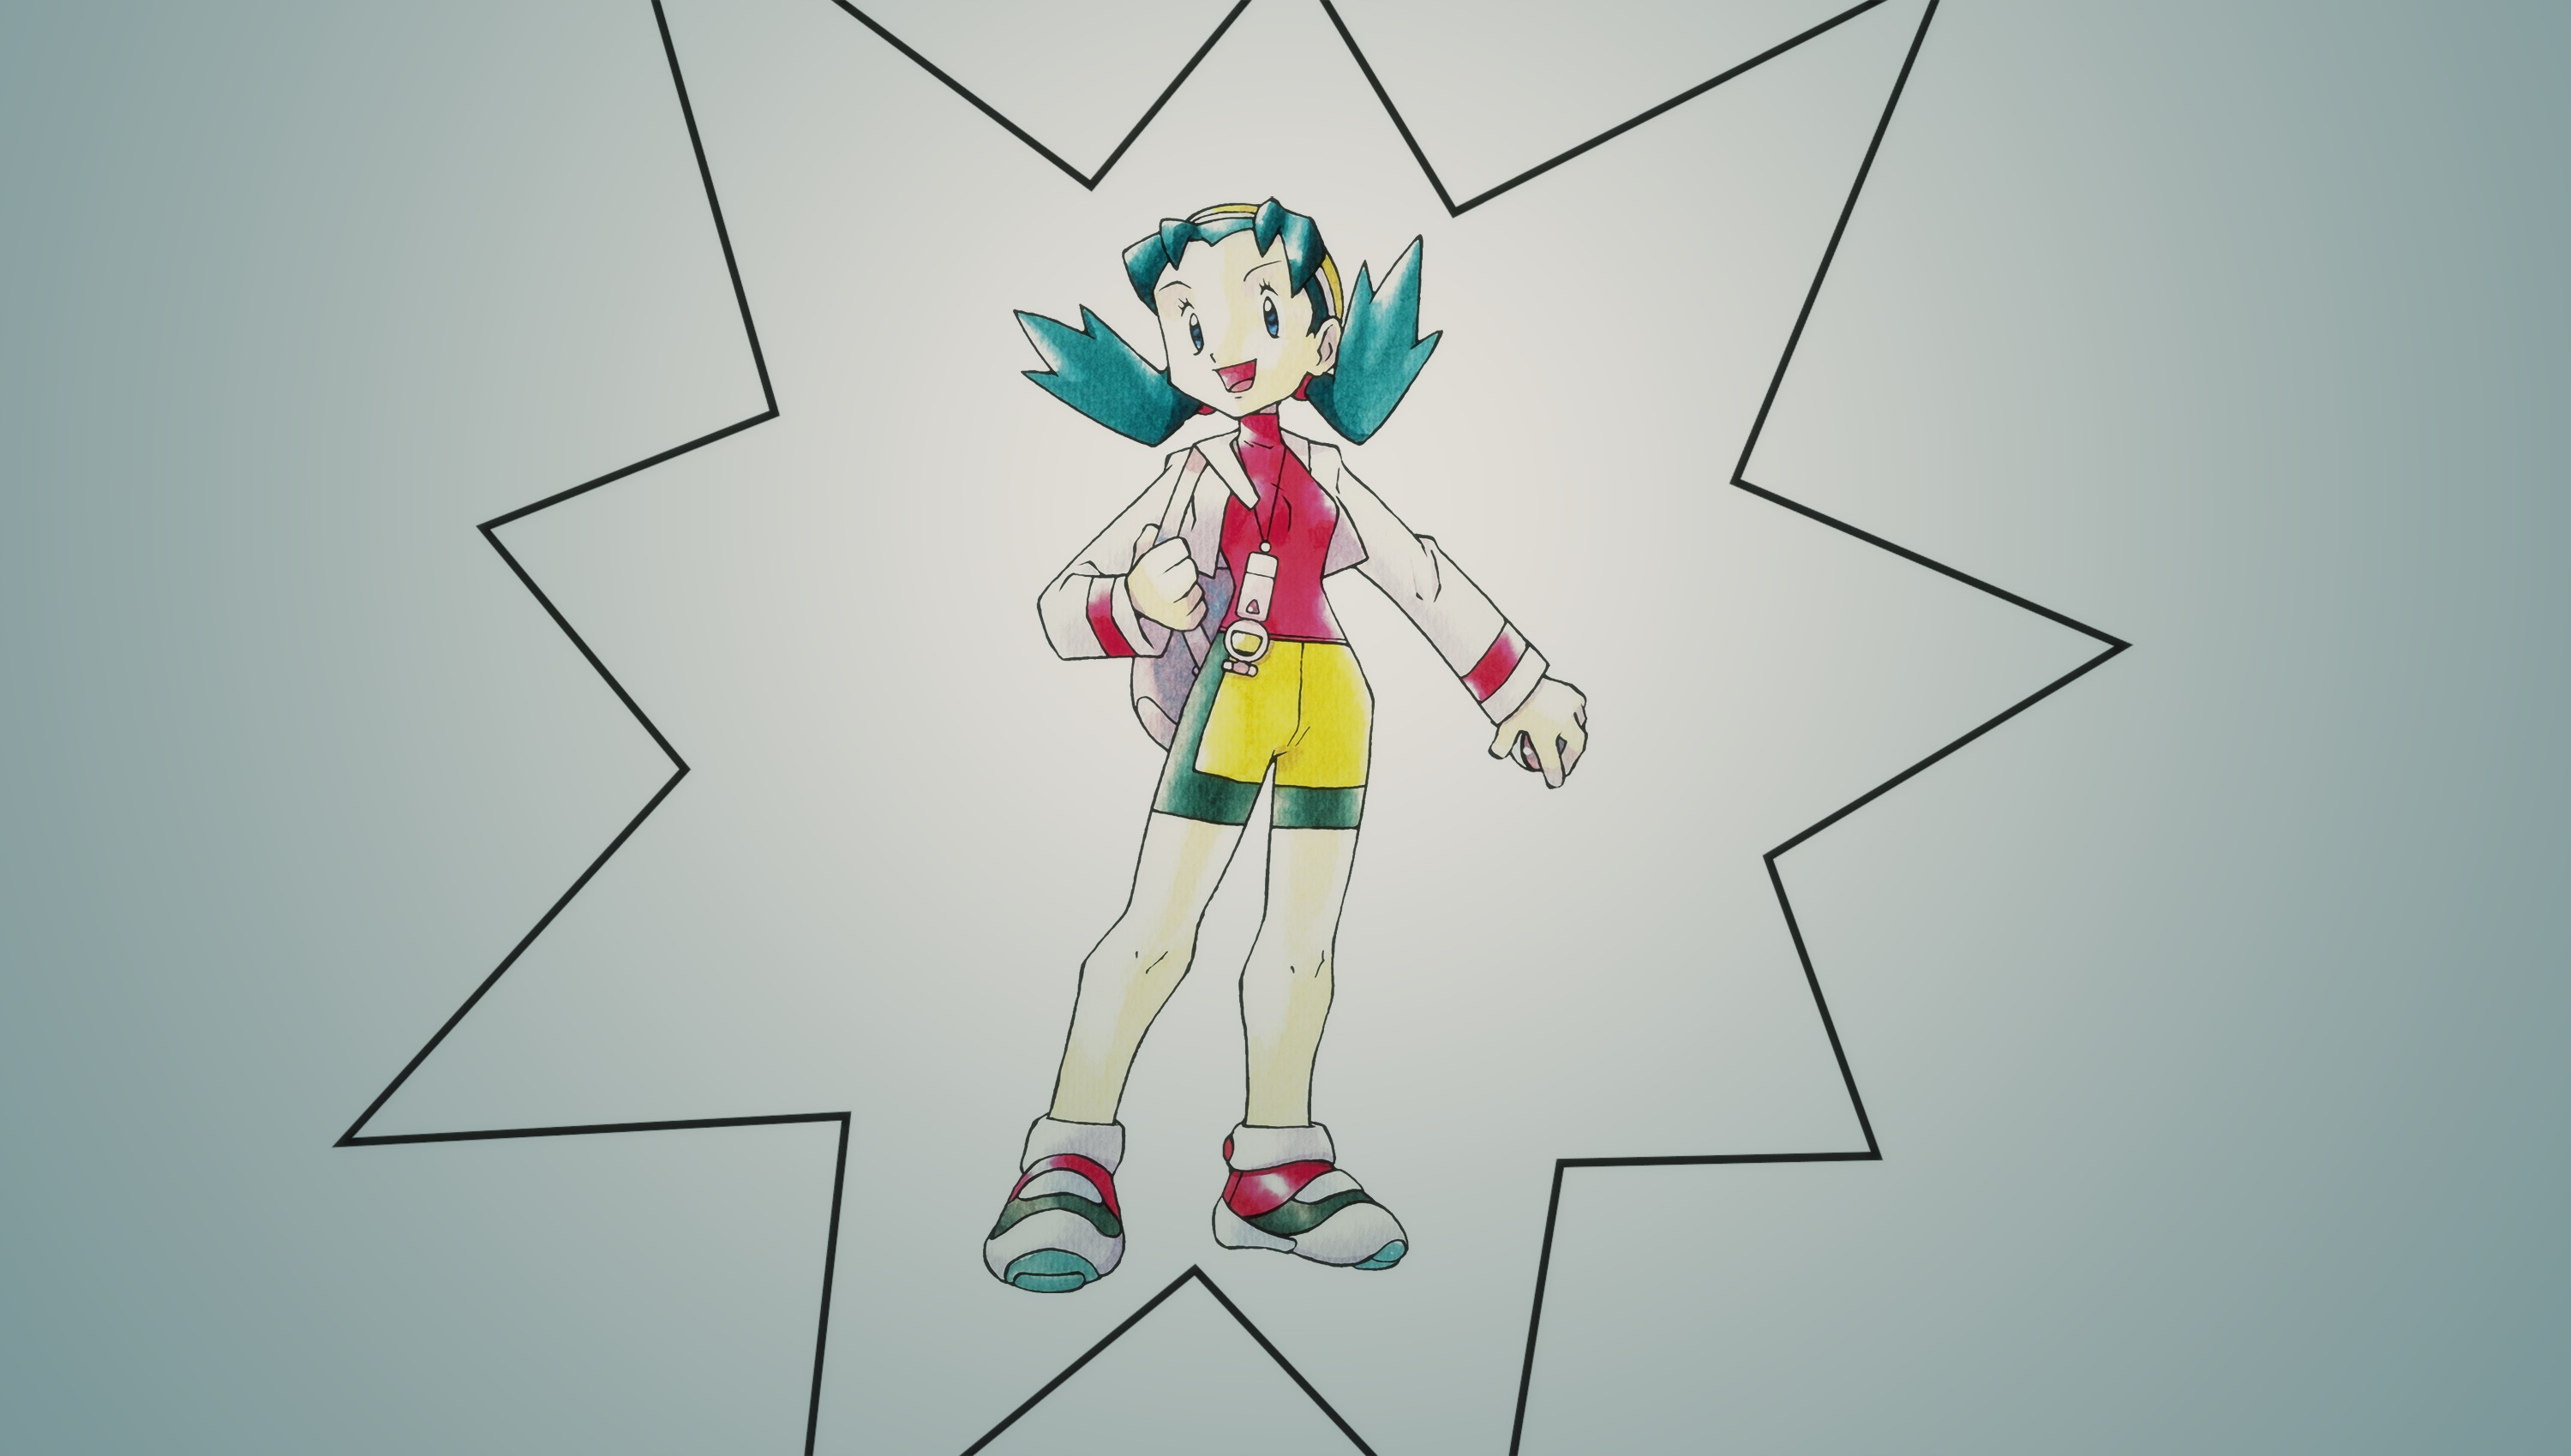 Kris, the green-haired female protagonist of Pokémon Crystal, posing with her backpack and a happy smile in her official game artwork